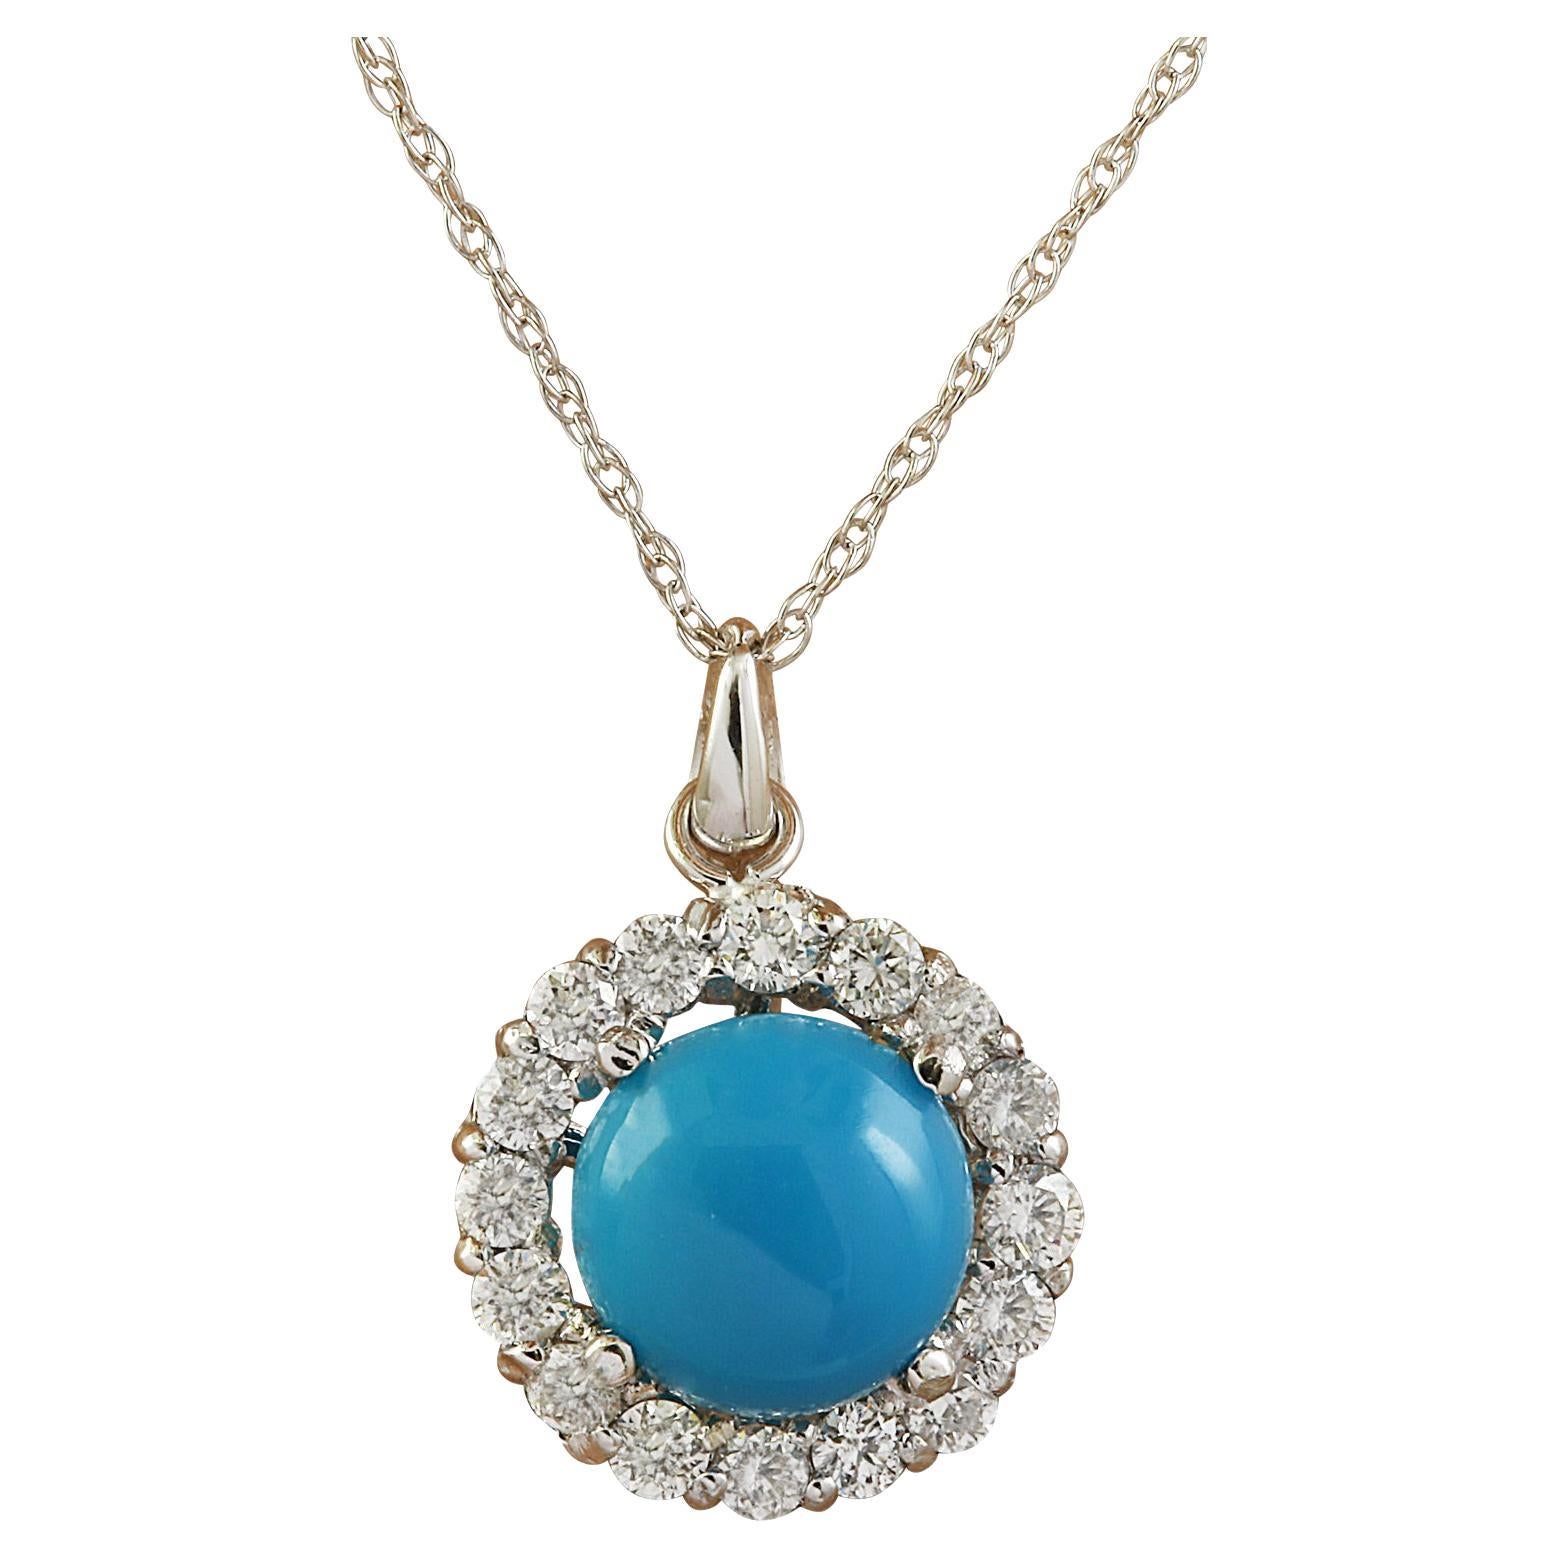 Exquisite Natural Turquoise Diamond Necklace In 14 Karat White Gold